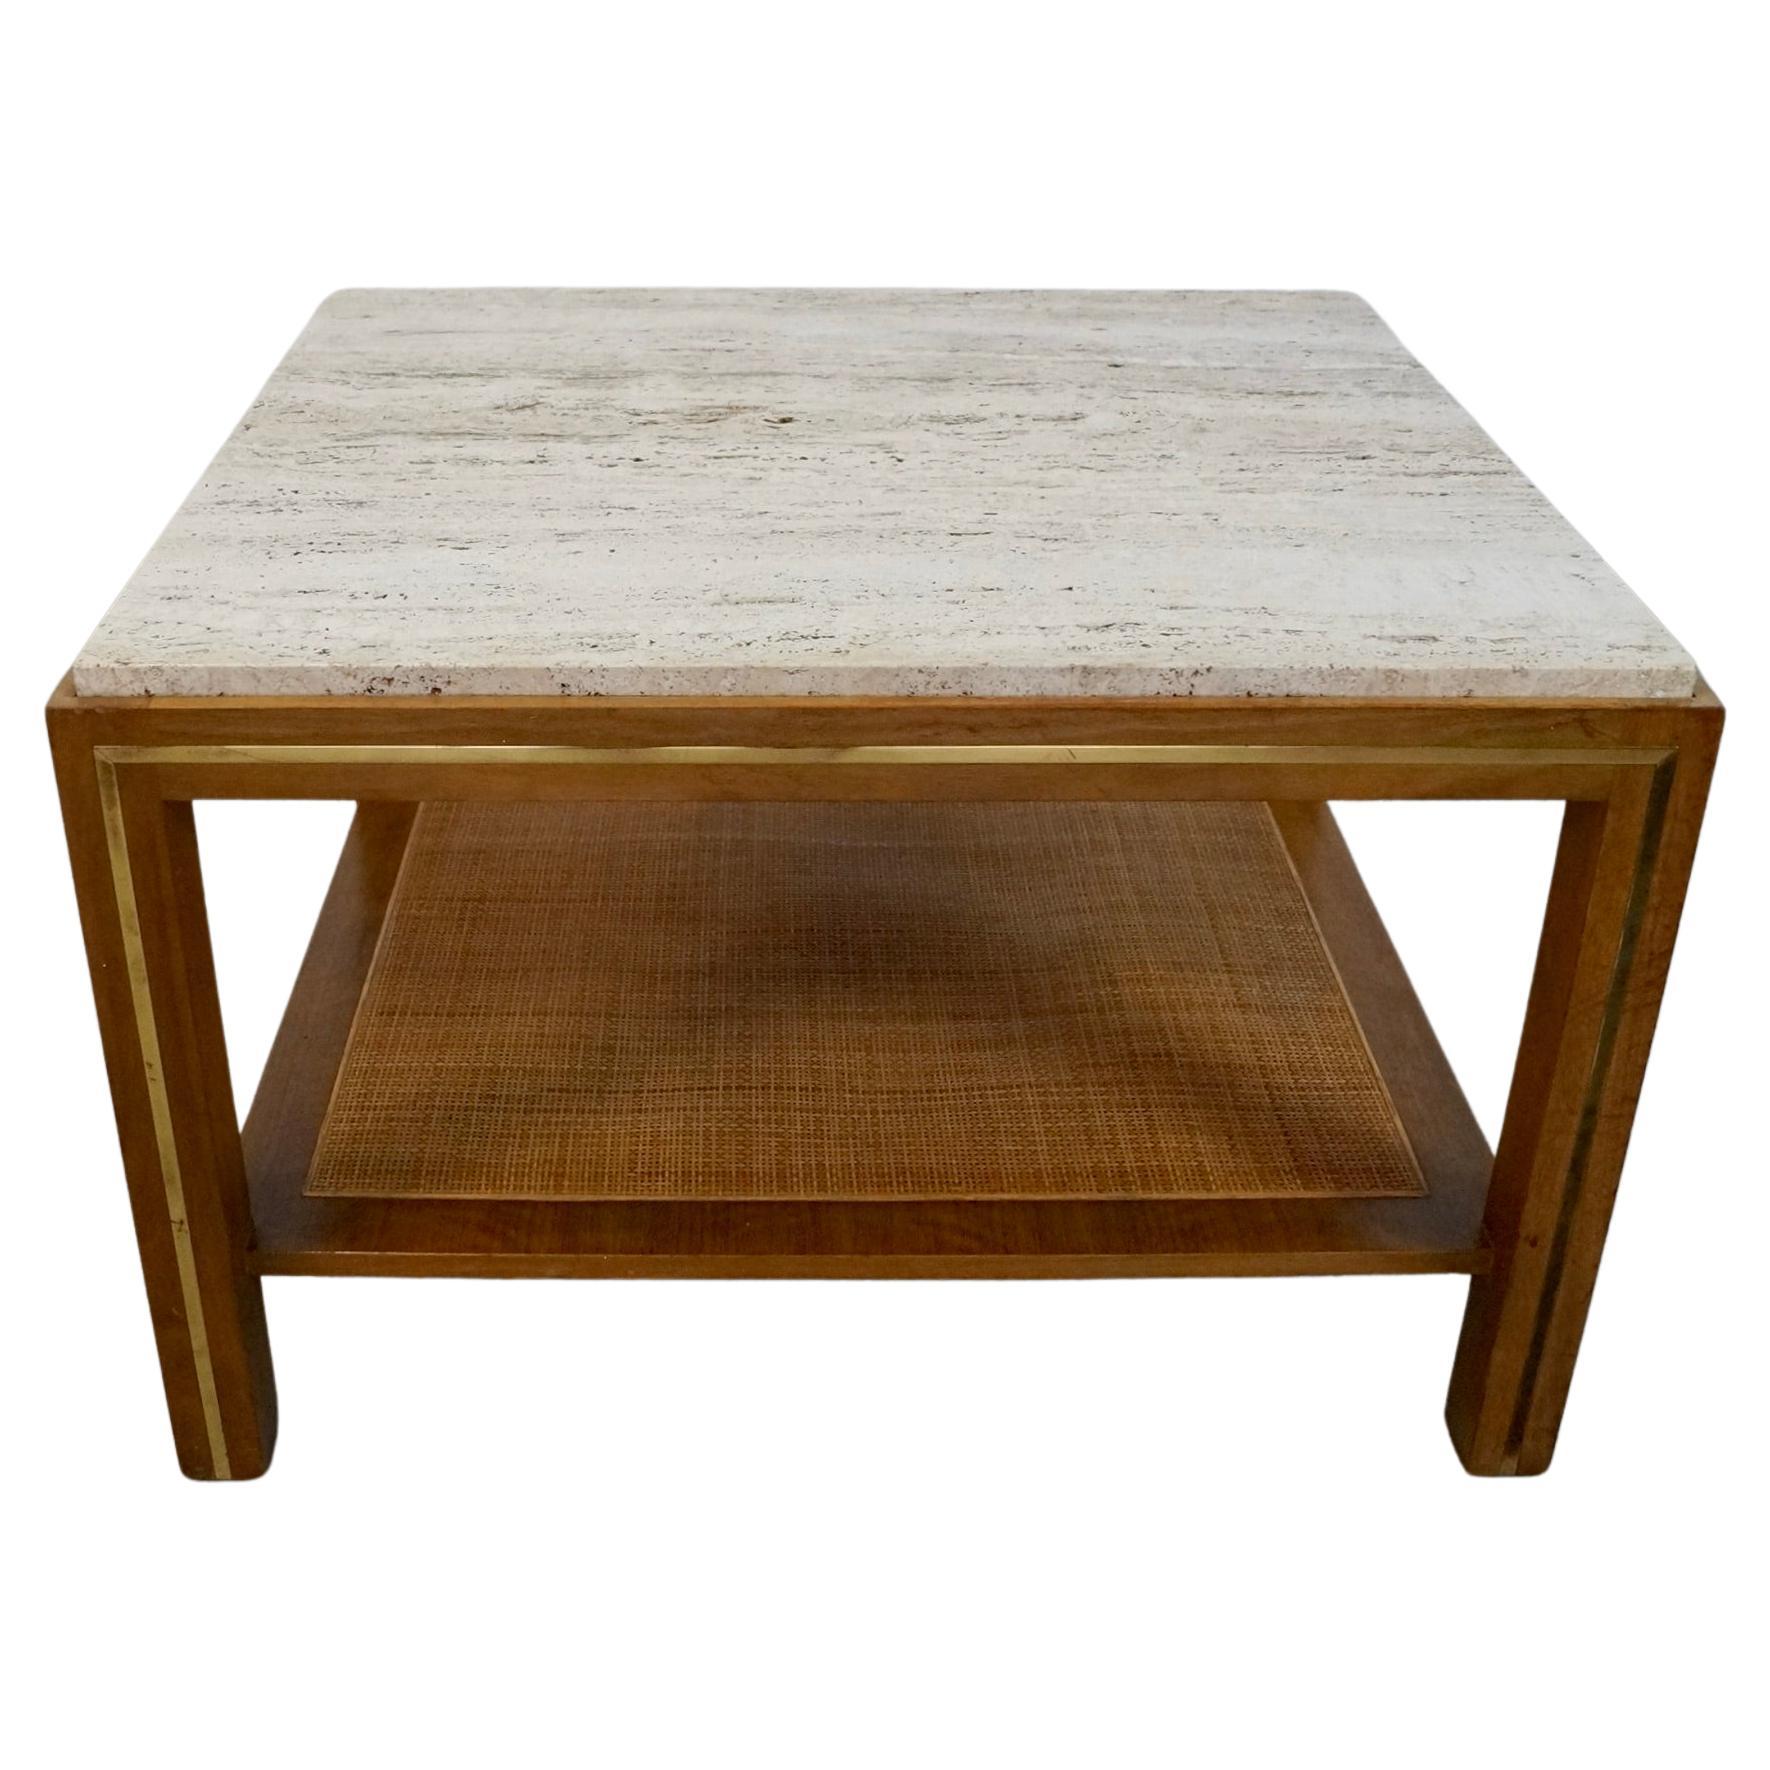 1960's Mid-Century Modern Edward Wormley Style End Table For Sale